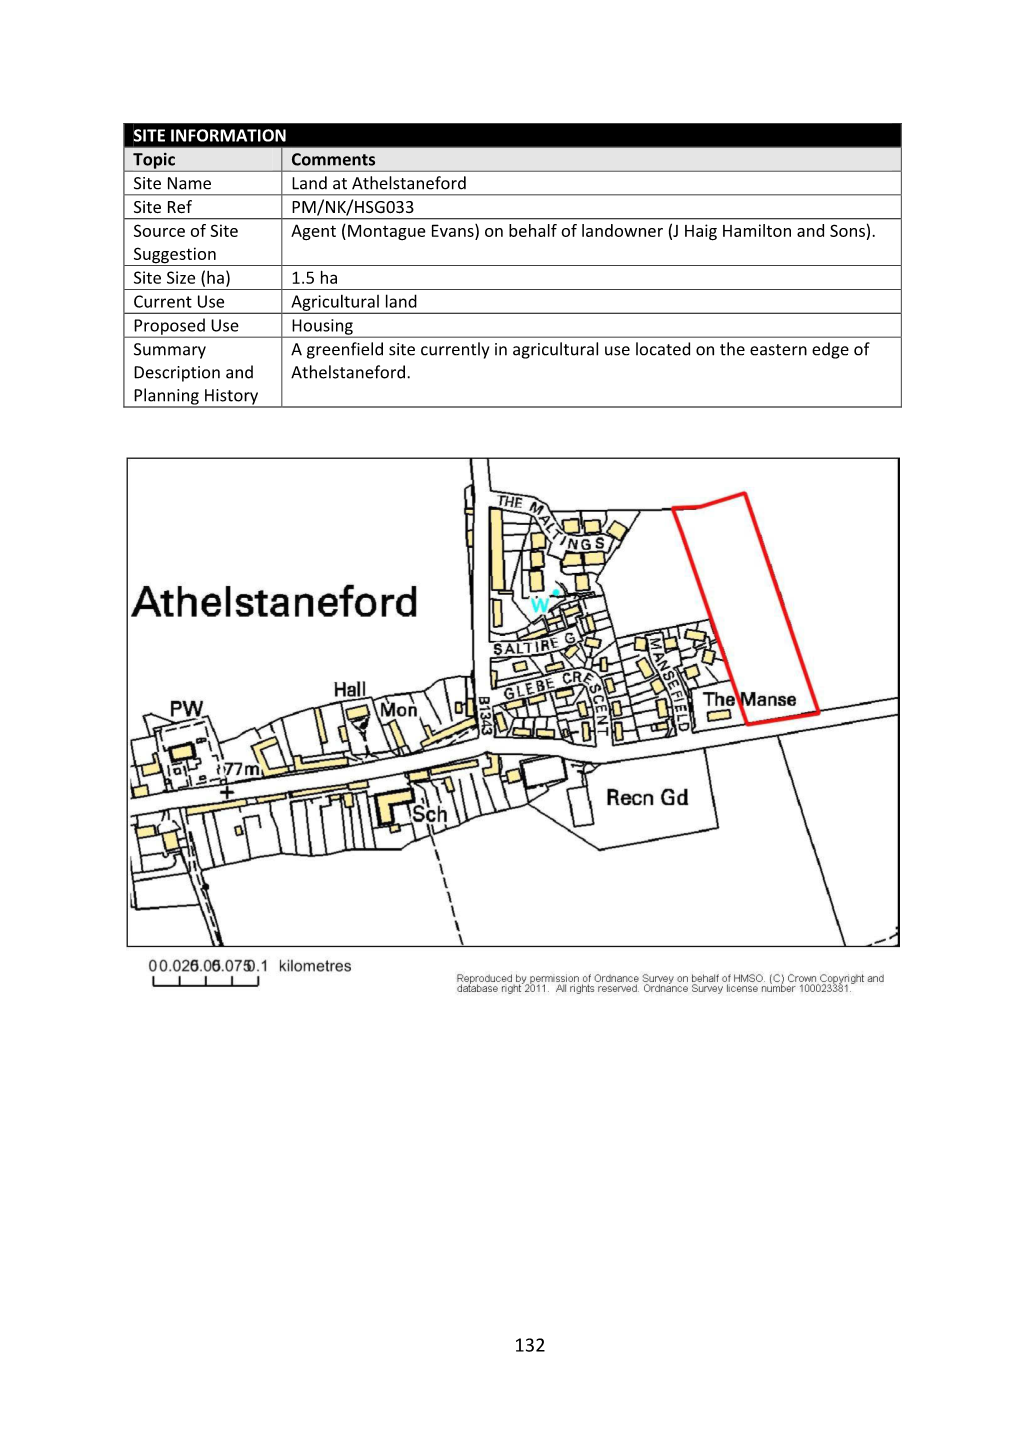 SITE INFORMATION Topic Comments Site Name Land at Athelstaneford